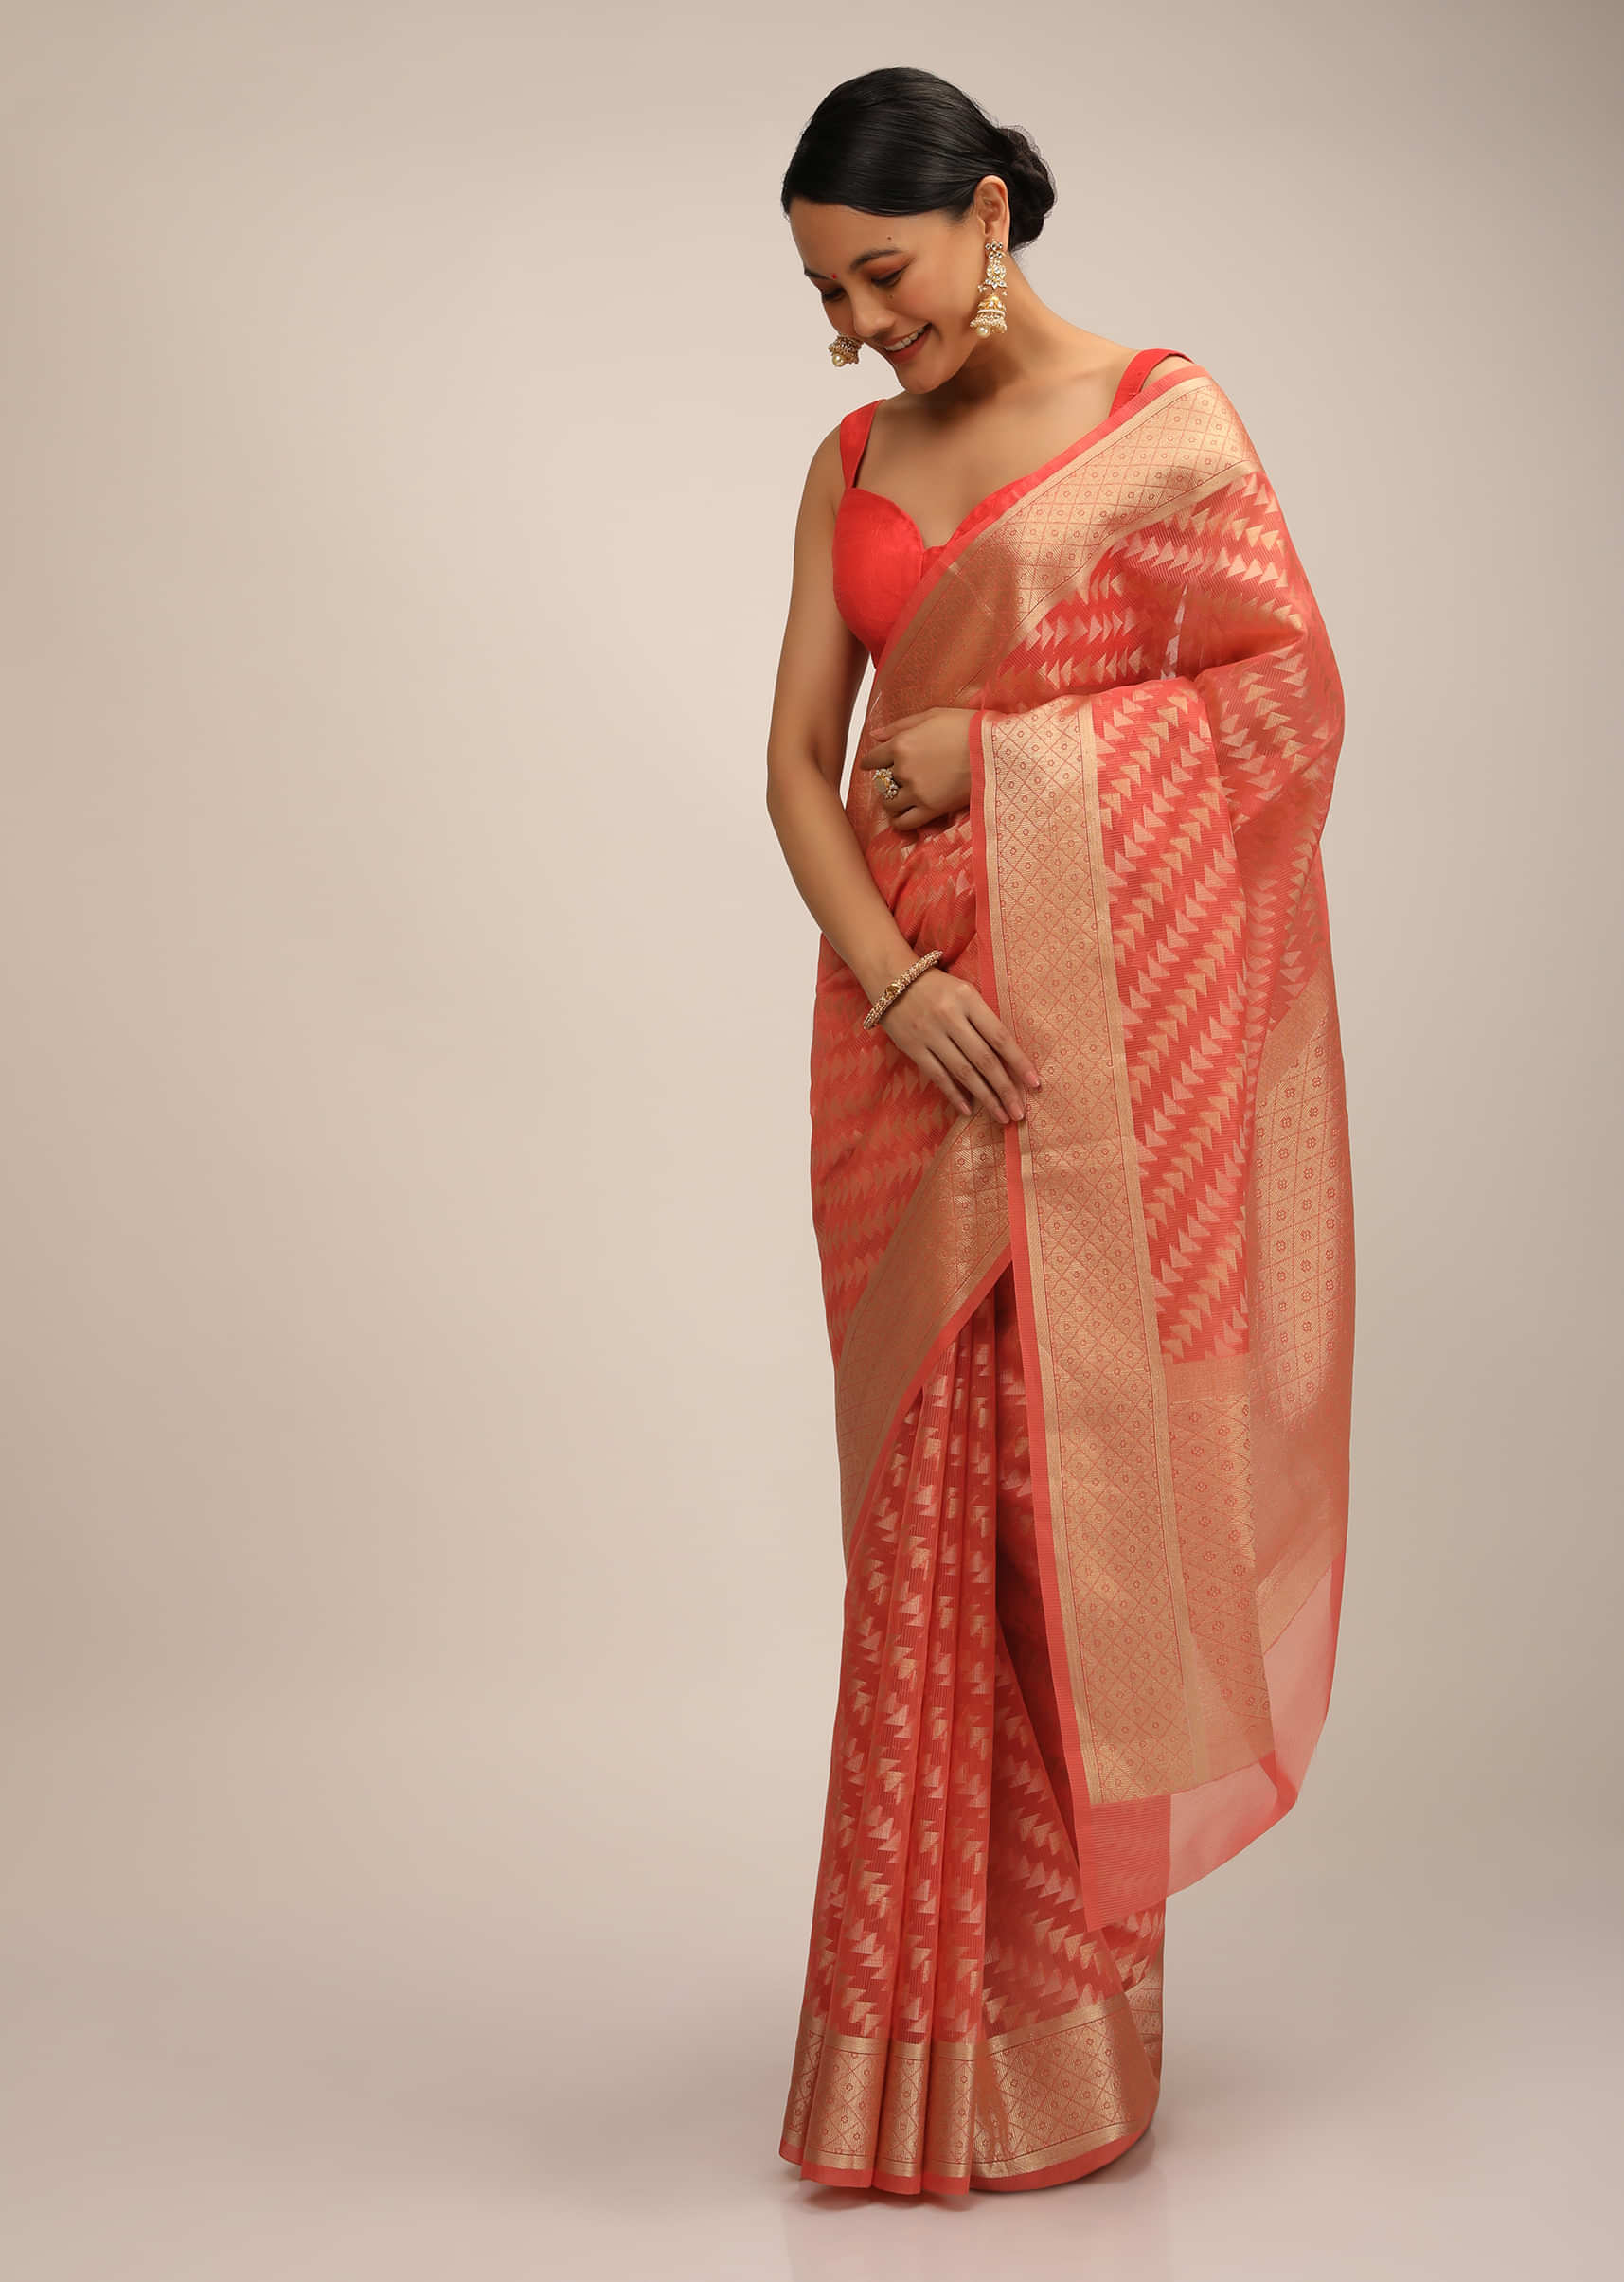 Coral Saree In Jacquard Silk With Two Toned Woven Triangle Motifs In Diagonal Striped Design